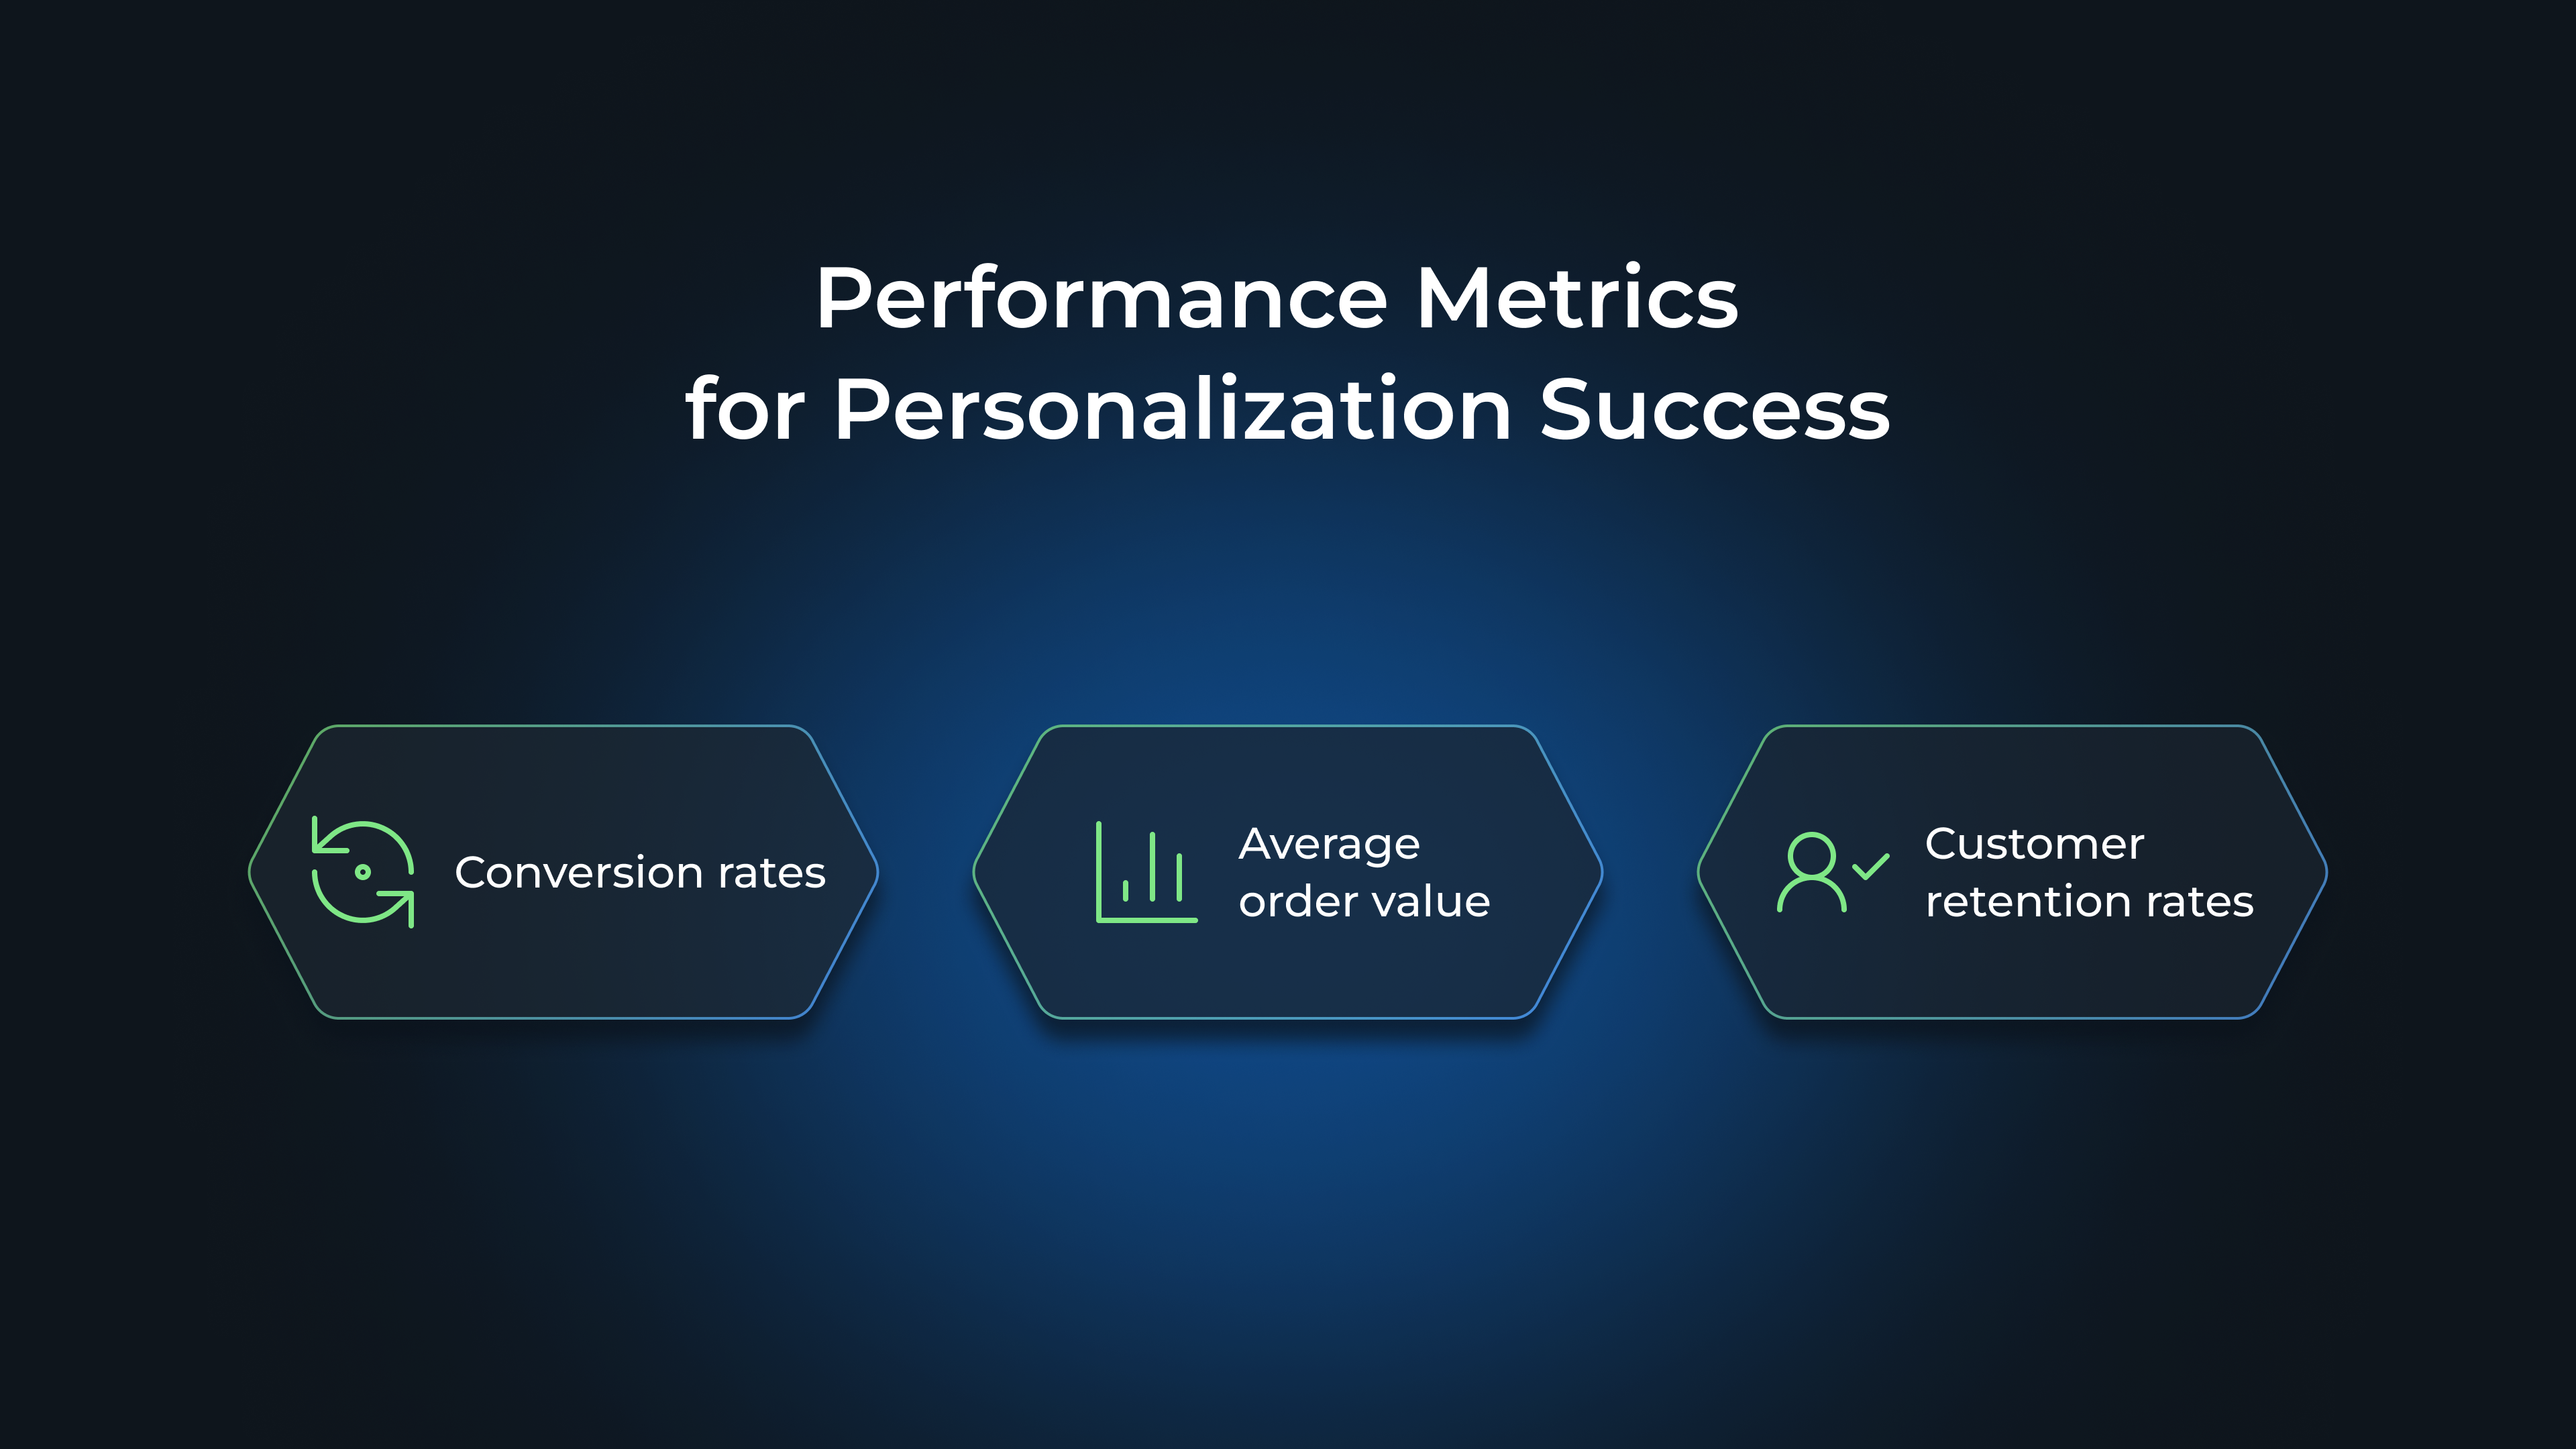 Performance Metrics for Personalization Success: Conversion rates, Average order value, Customer retention rates
